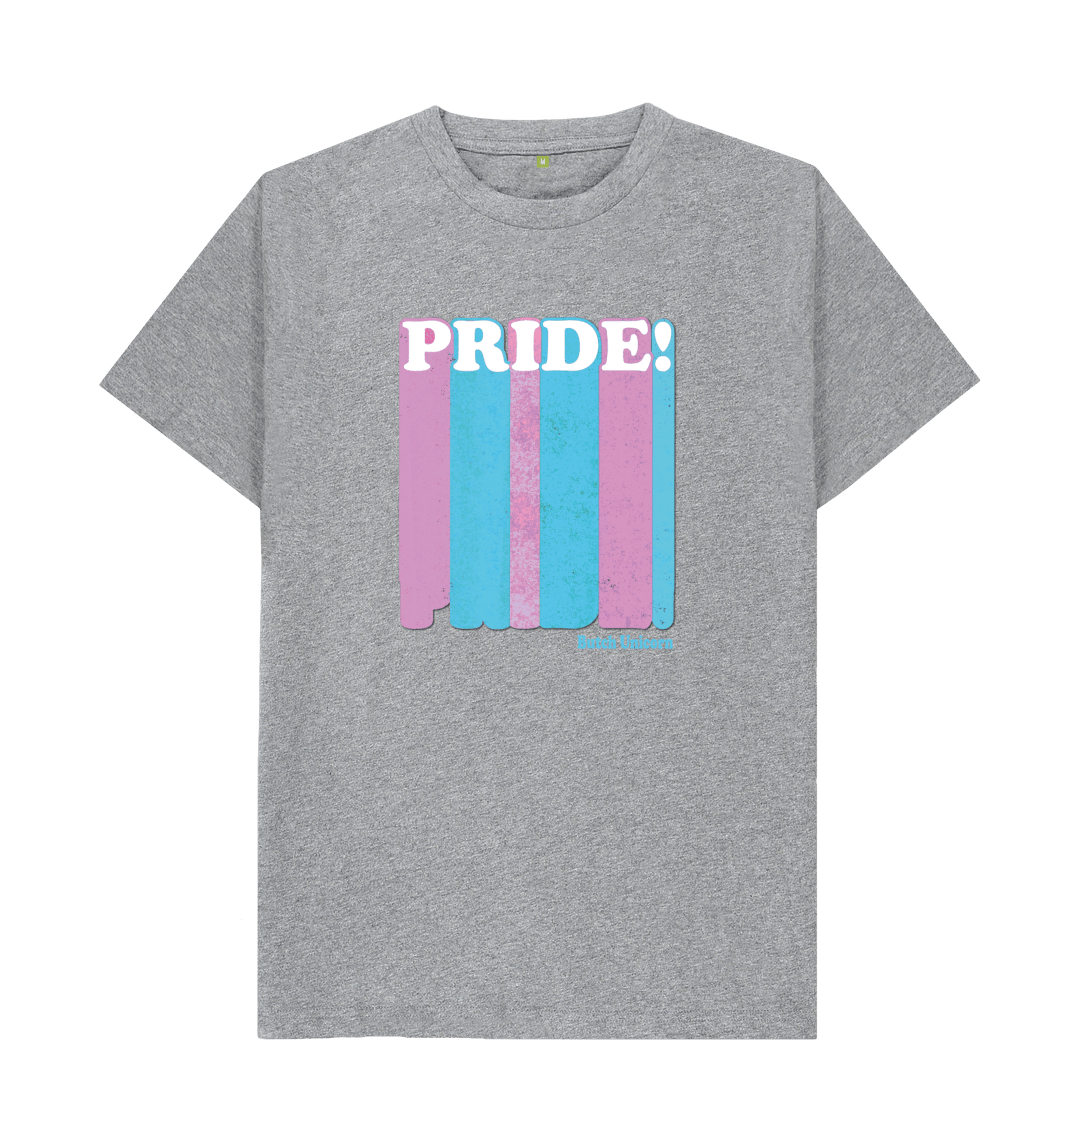 Show your support for the Trans Community in the new Pride Trans Organic Cotton Tee. butchunicorn.com/product/pride-…

#butchunicorn #organicclothing #organictshirts #sustainability #tshirts #tshirt #lgbtq #translivesmatter #transgender #transrights #supporttranskids